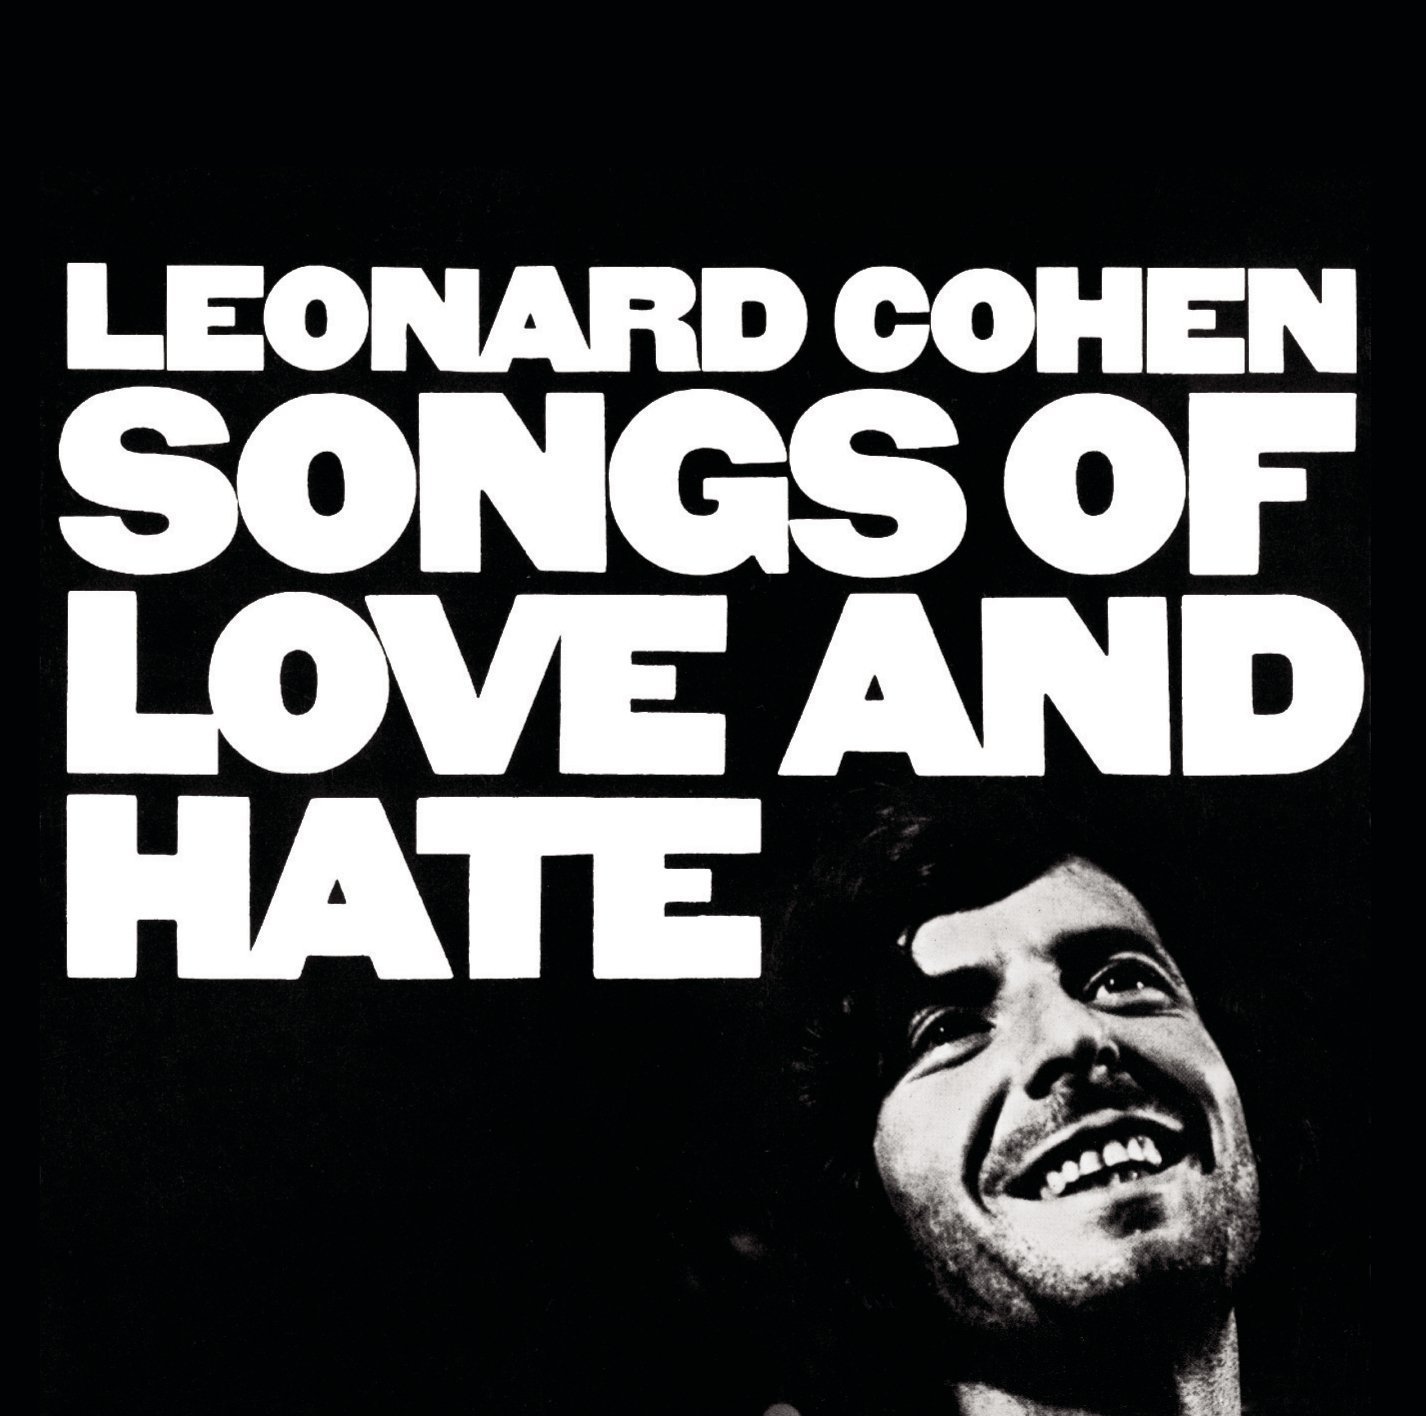 Vinyl Record Leonard Cohen Songs of Love and Hate (LP)